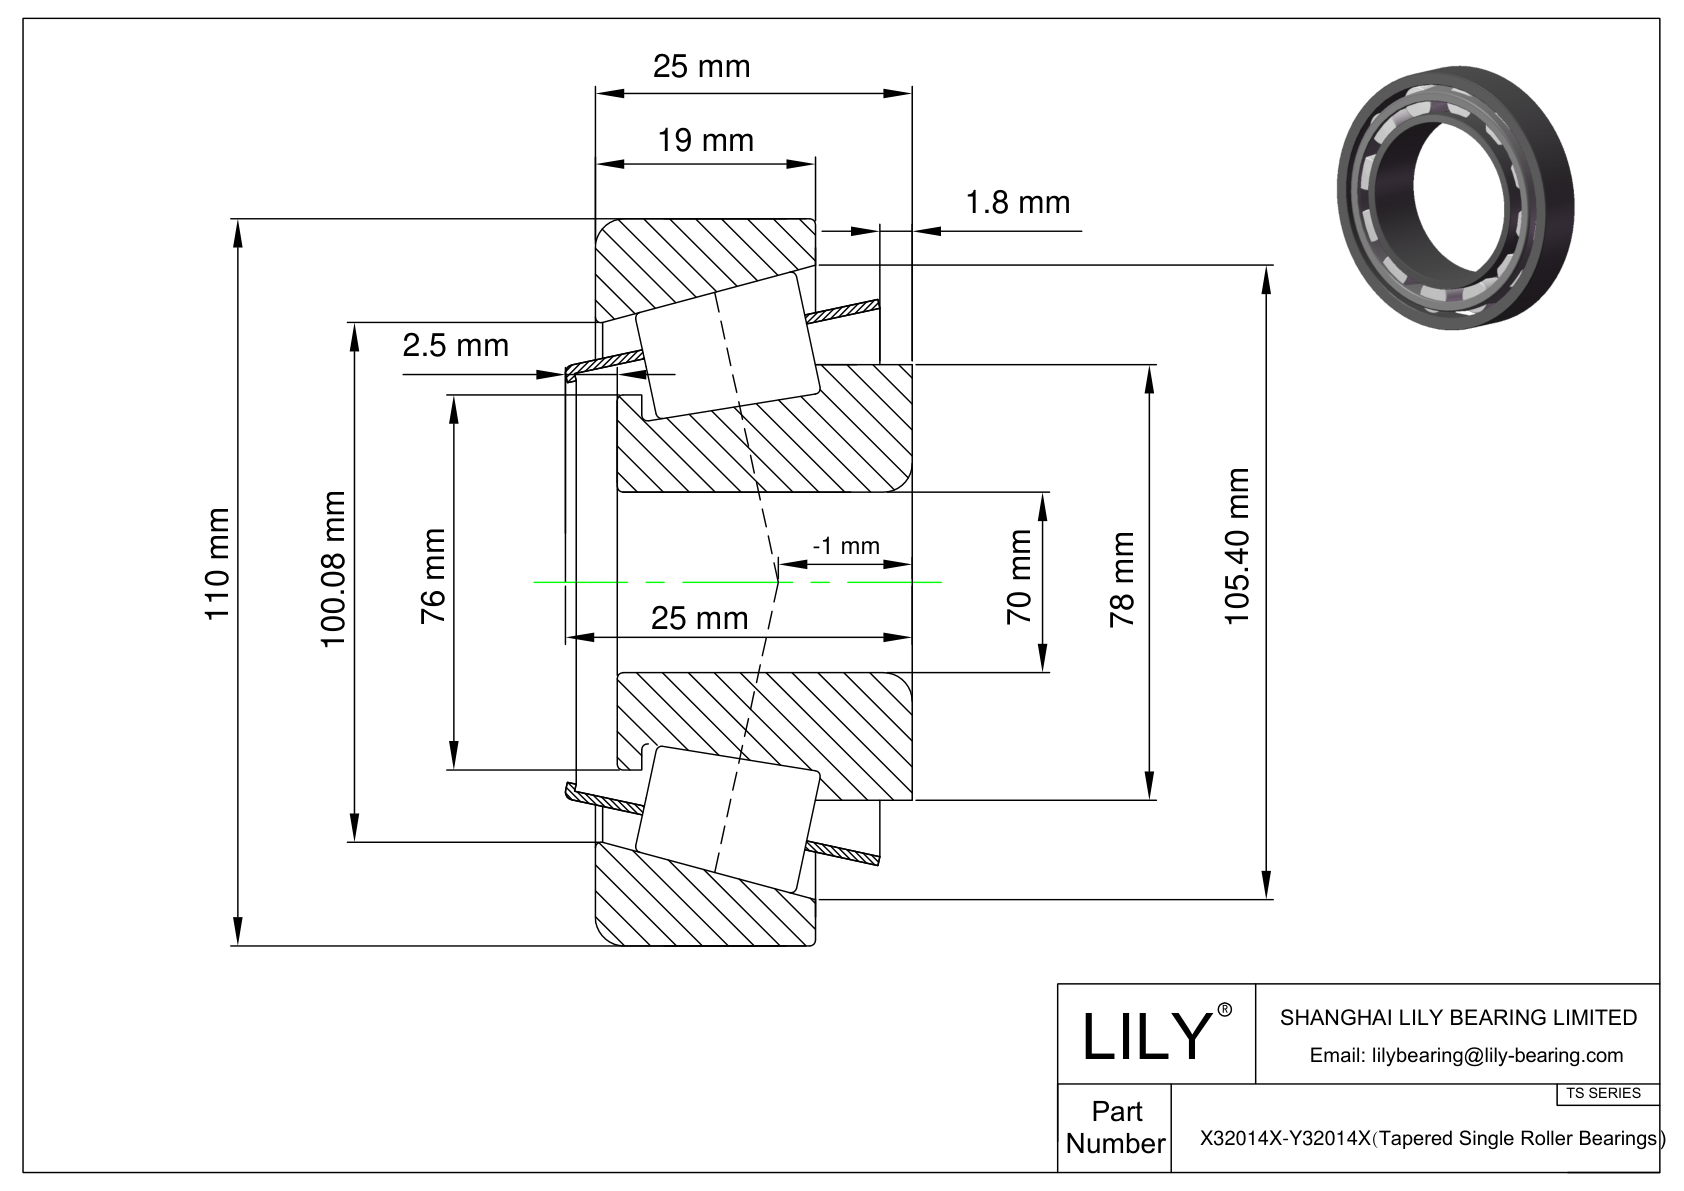 X32014X-Y32014X TS (Tapered Single Roller Bearings) (Metric) cad drawing